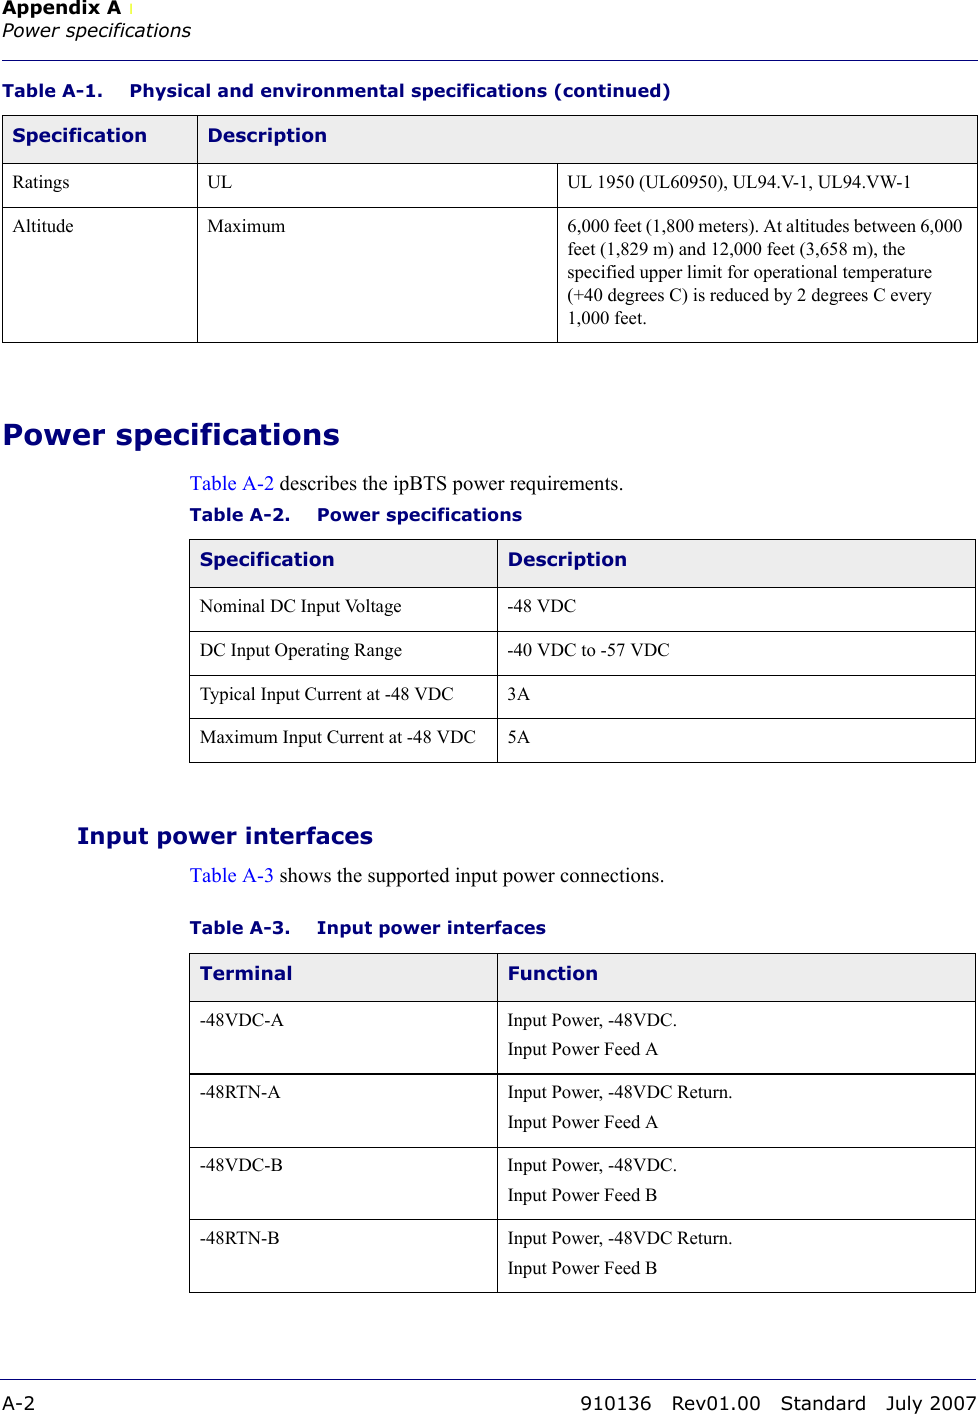 Appendix A lPower specificationsA-2 910136 Rev01.00 Standard July 2007Power specificationsTable A-2 describes the ipBTS power requirements.Input power interfacesTable A-3 shows the supported input power connections.Ratings UL UL 1950 (UL60950), UL94.V-1, UL94.VW-1Altitude Maximum  6,000 feet (1,800 meters). At altitudes between 6,000 feet (1,829 m) and 12,000 feet (3,658 m), the specified upper limit for operational temperature (+40 degrees C) is reduced by 2 degrees C every 1,000 feet.Table A-1. Physical and environmental specifications (continued)Specification DescriptionTable A-2. Power specificationsSpecification DescriptionNominal DC Input Voltage  -48 VDCDC Input Operating Range -40 VDC to -57 VDCTypical Input Current at -48 VDC 3AMaximum Input Current at -48 VDC 5ATable A-3. Input power interfacesTerminal Function-48VDC-A Input Power, -48VDC.Input Power Feed A-48RTN-A Input Power, -48VDC Return.Input Power Feed A-48VDC-B Input Power, -48VDC.Input Power Feed B-48RTN-B Input Power, -48VDC Return.Input Power Feed B